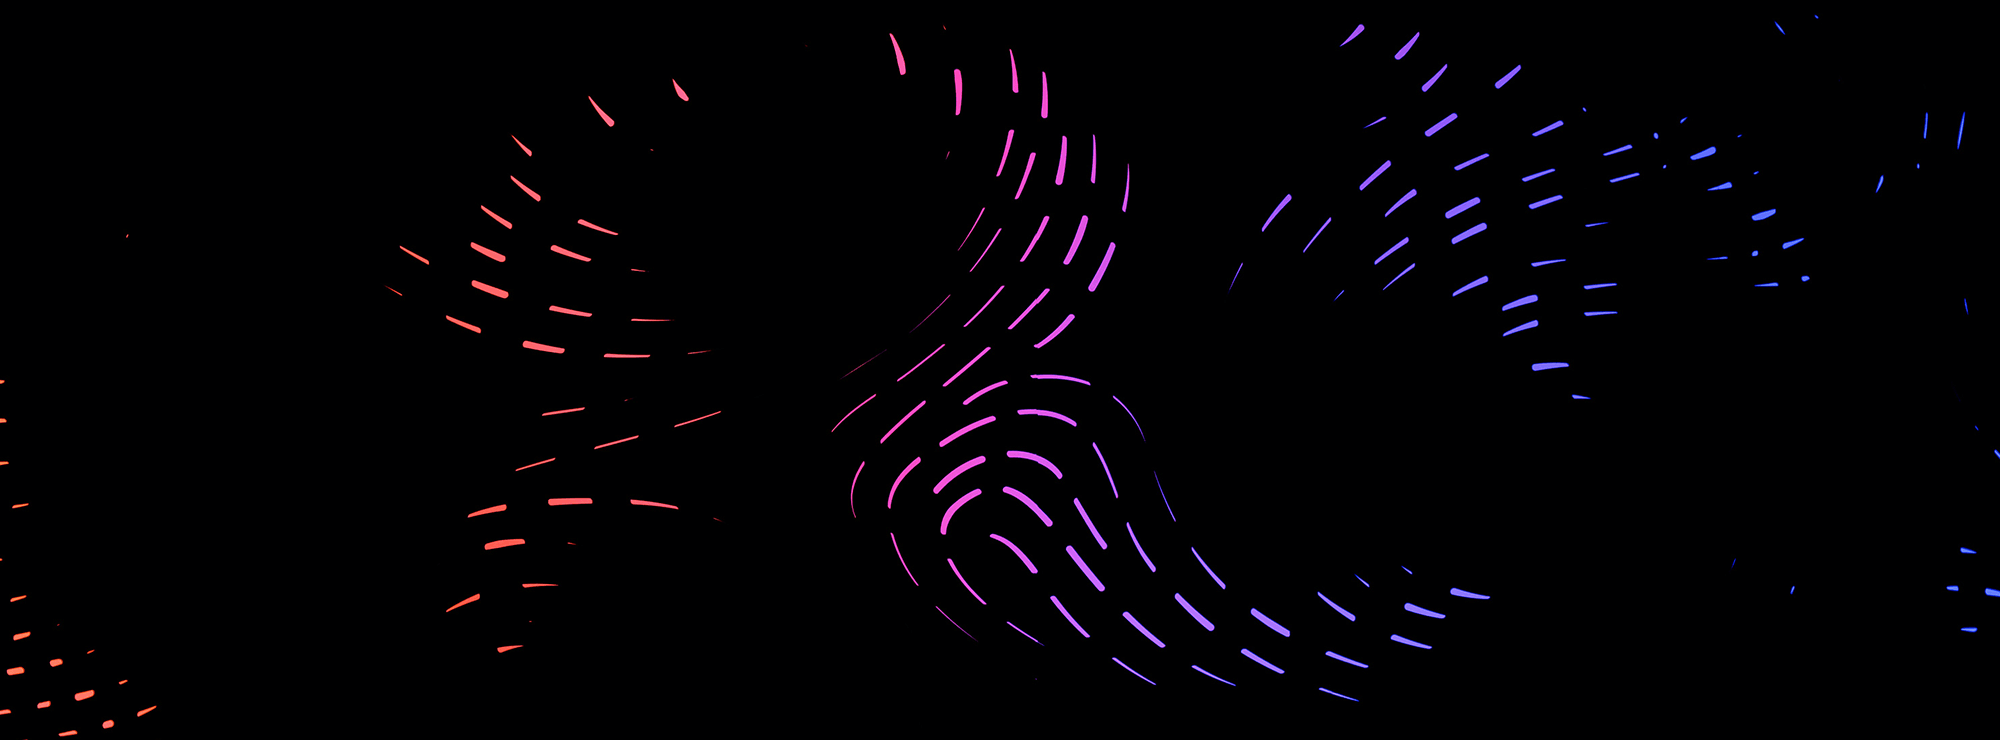 A graphic of multicoloured dashes in swirls on a black background.